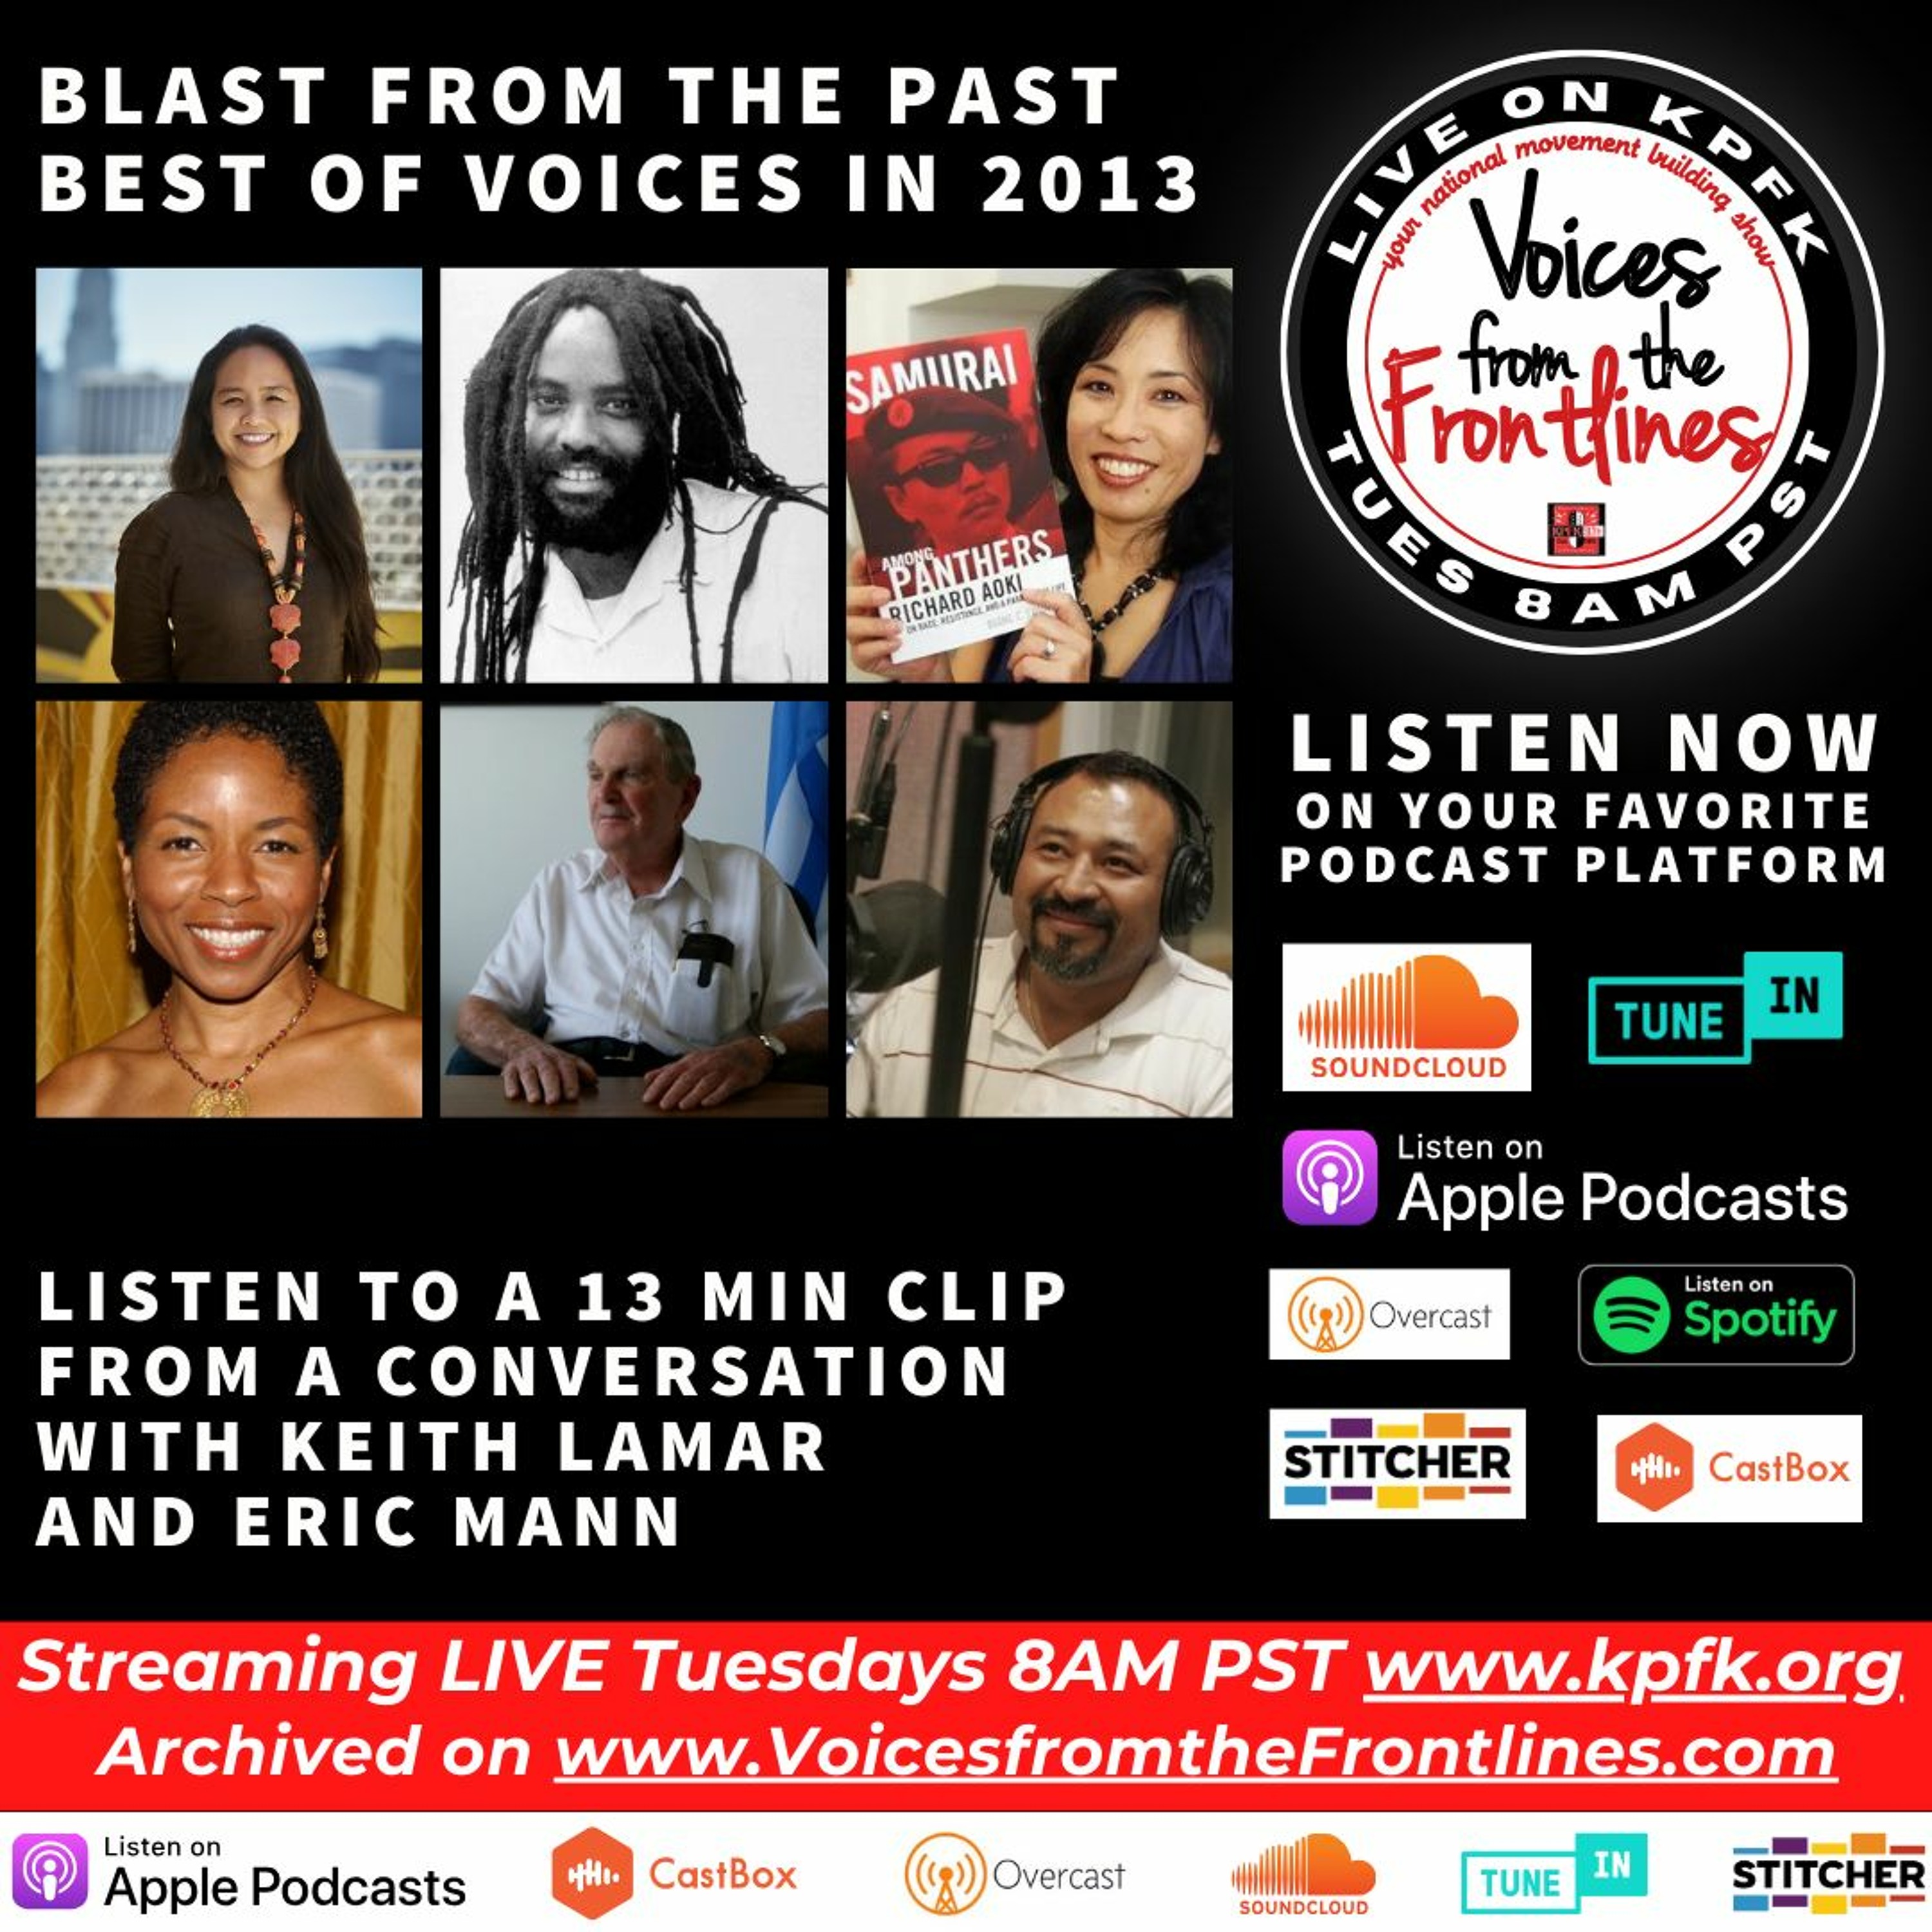 The Best Voices Classics & Keith Lamar